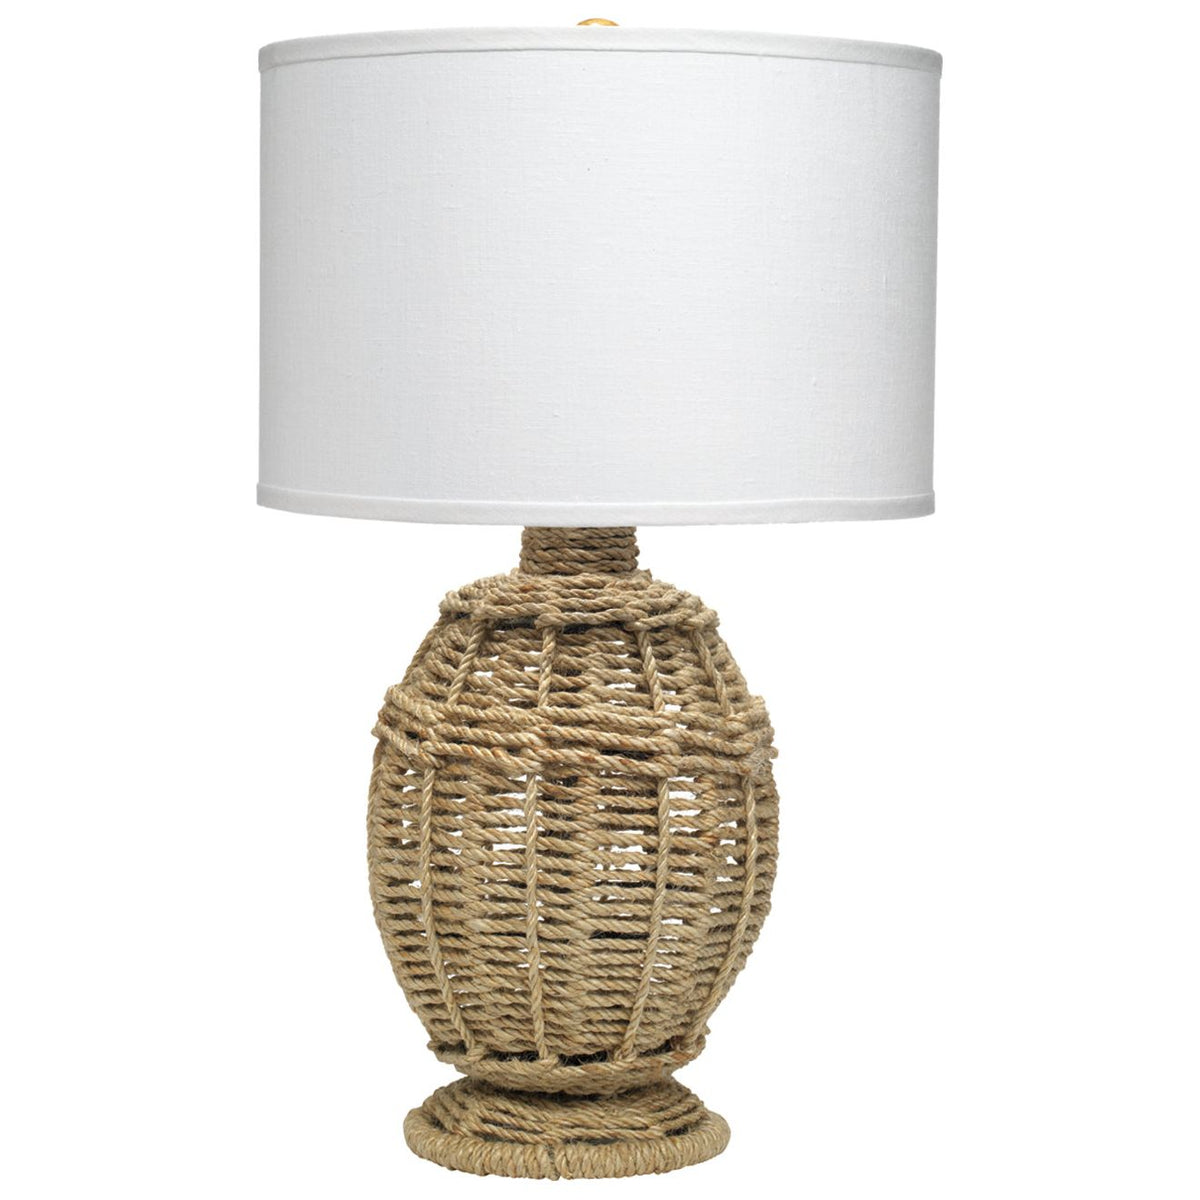 Jamie Young Company - 1ROPE-SMNA - Jute Urn Table Lamp - Jute - Natural